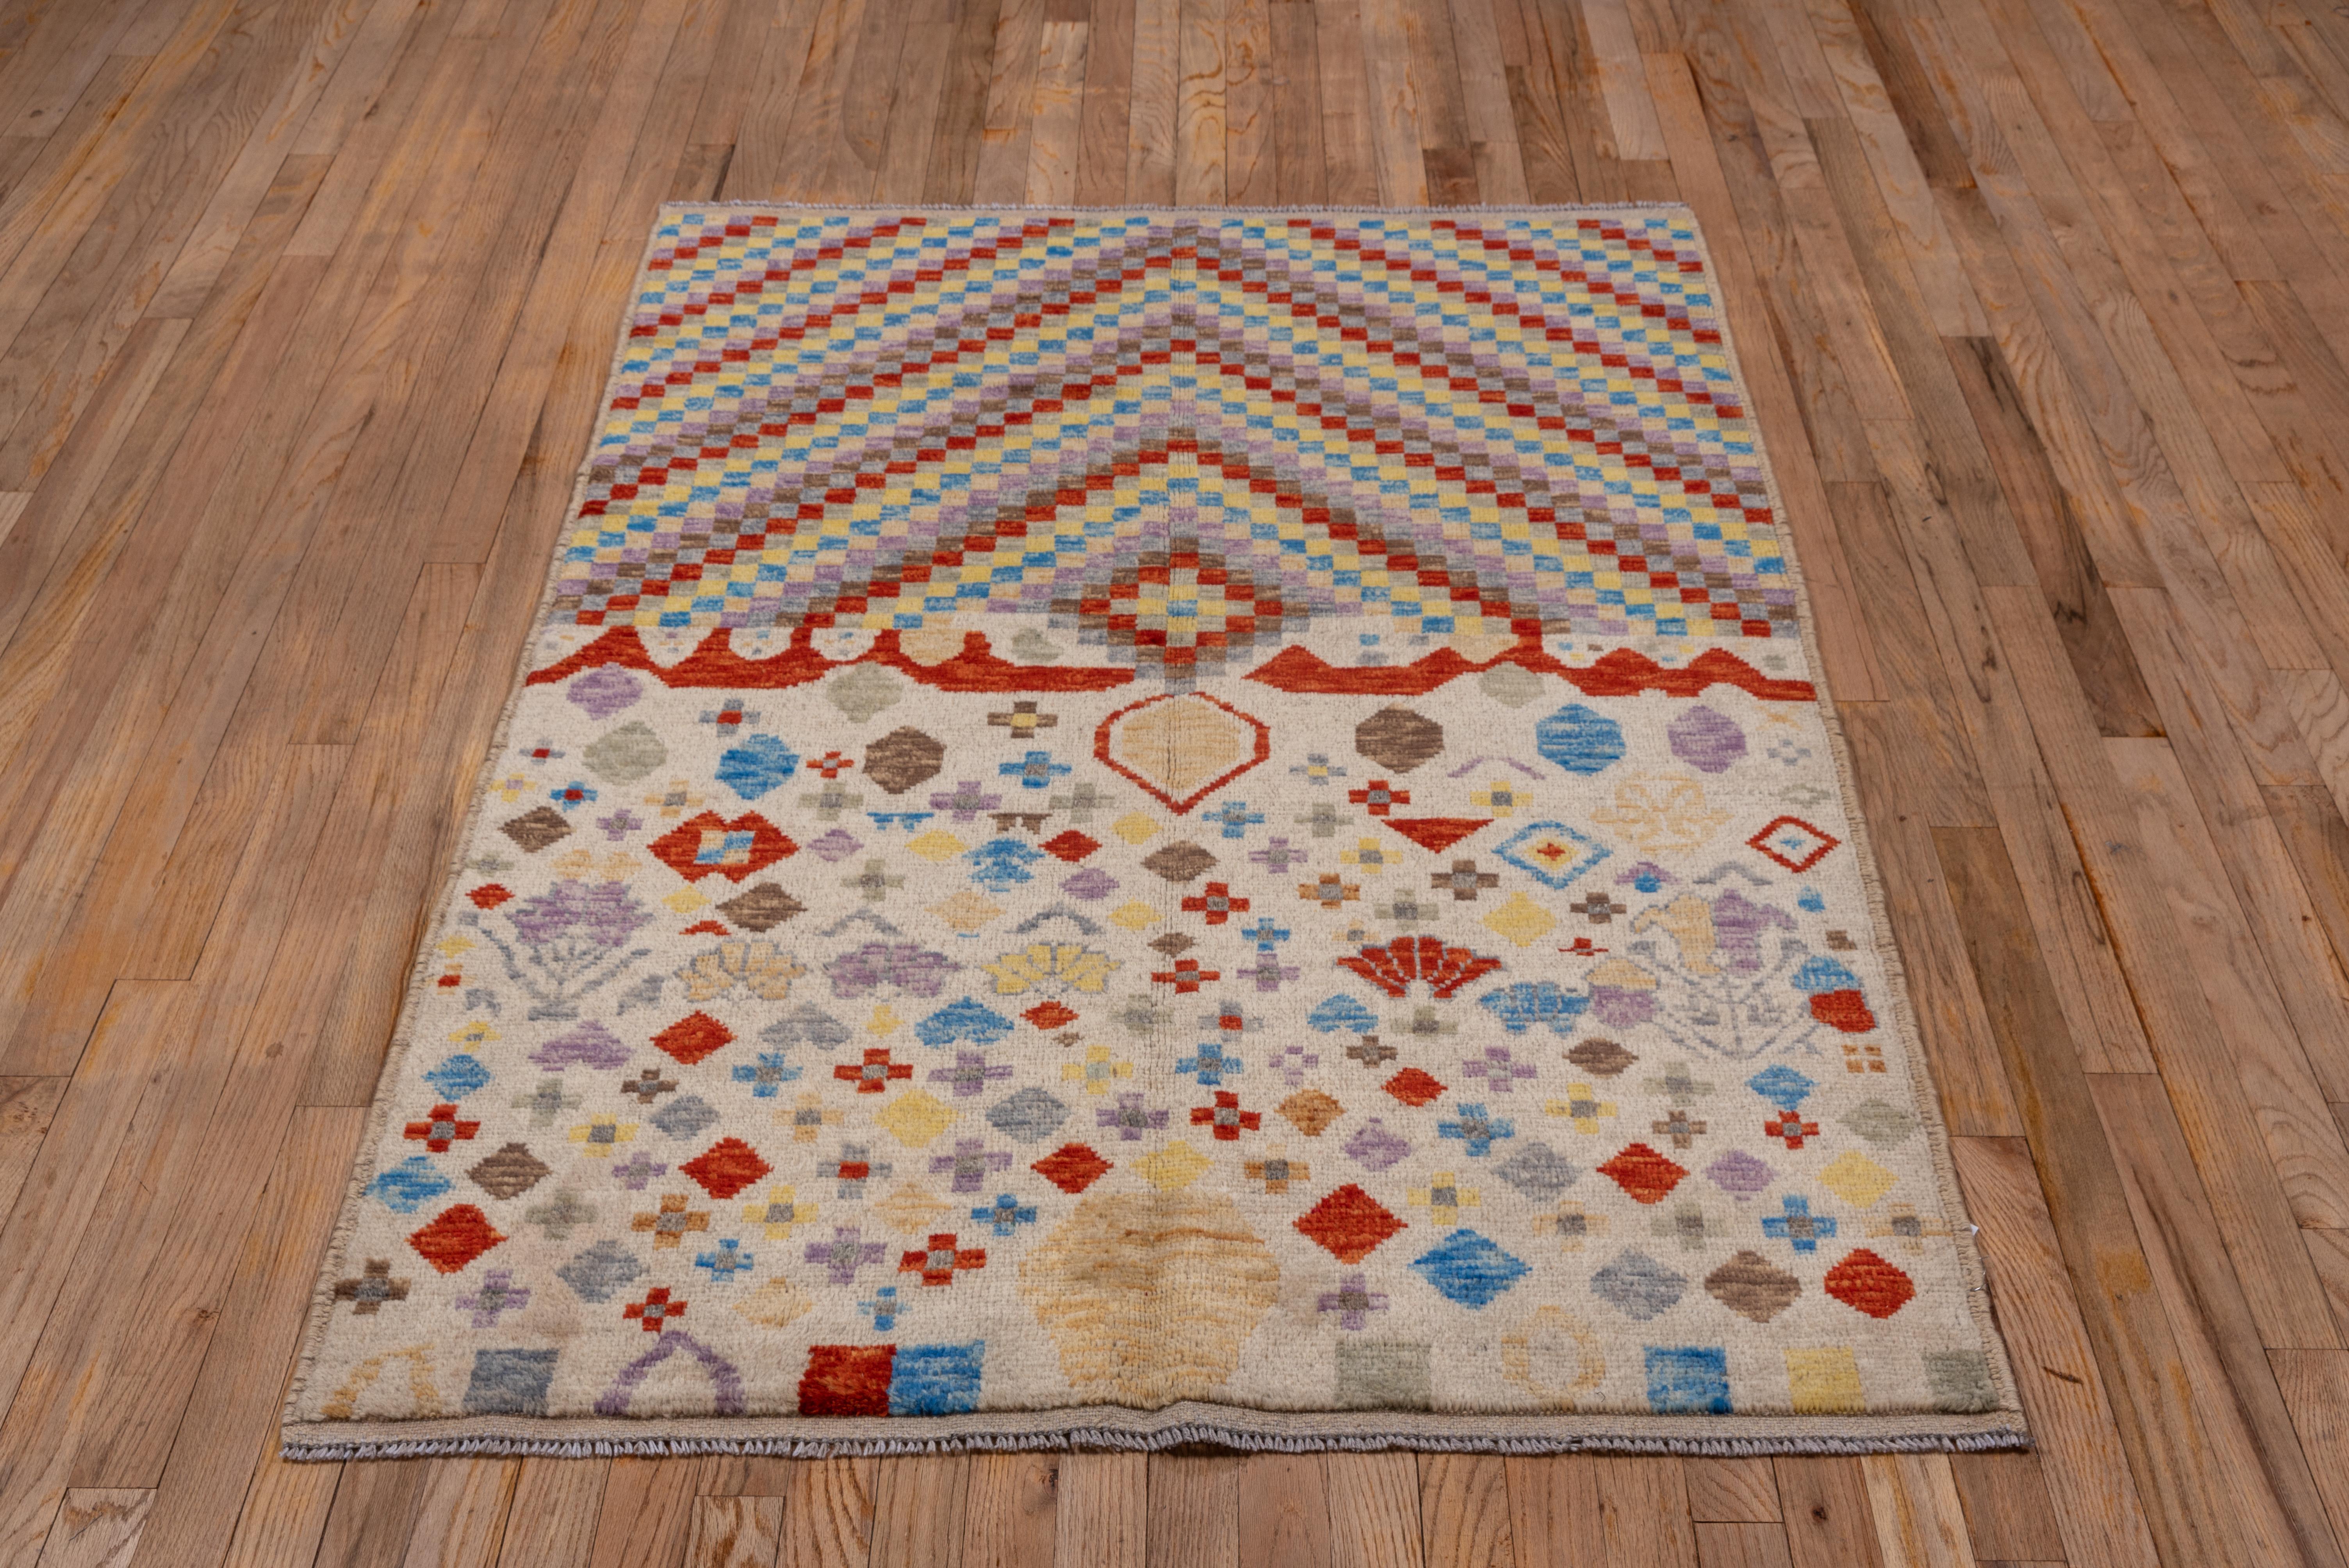 This modern Gabbeh rug has one half is cream grounded, with a scatter of crosses, small hexagons, detailed flowers and wriggling cloud bands, all in closely abrashed red, light blue, straw, light green and rose. The other half displays a chevron